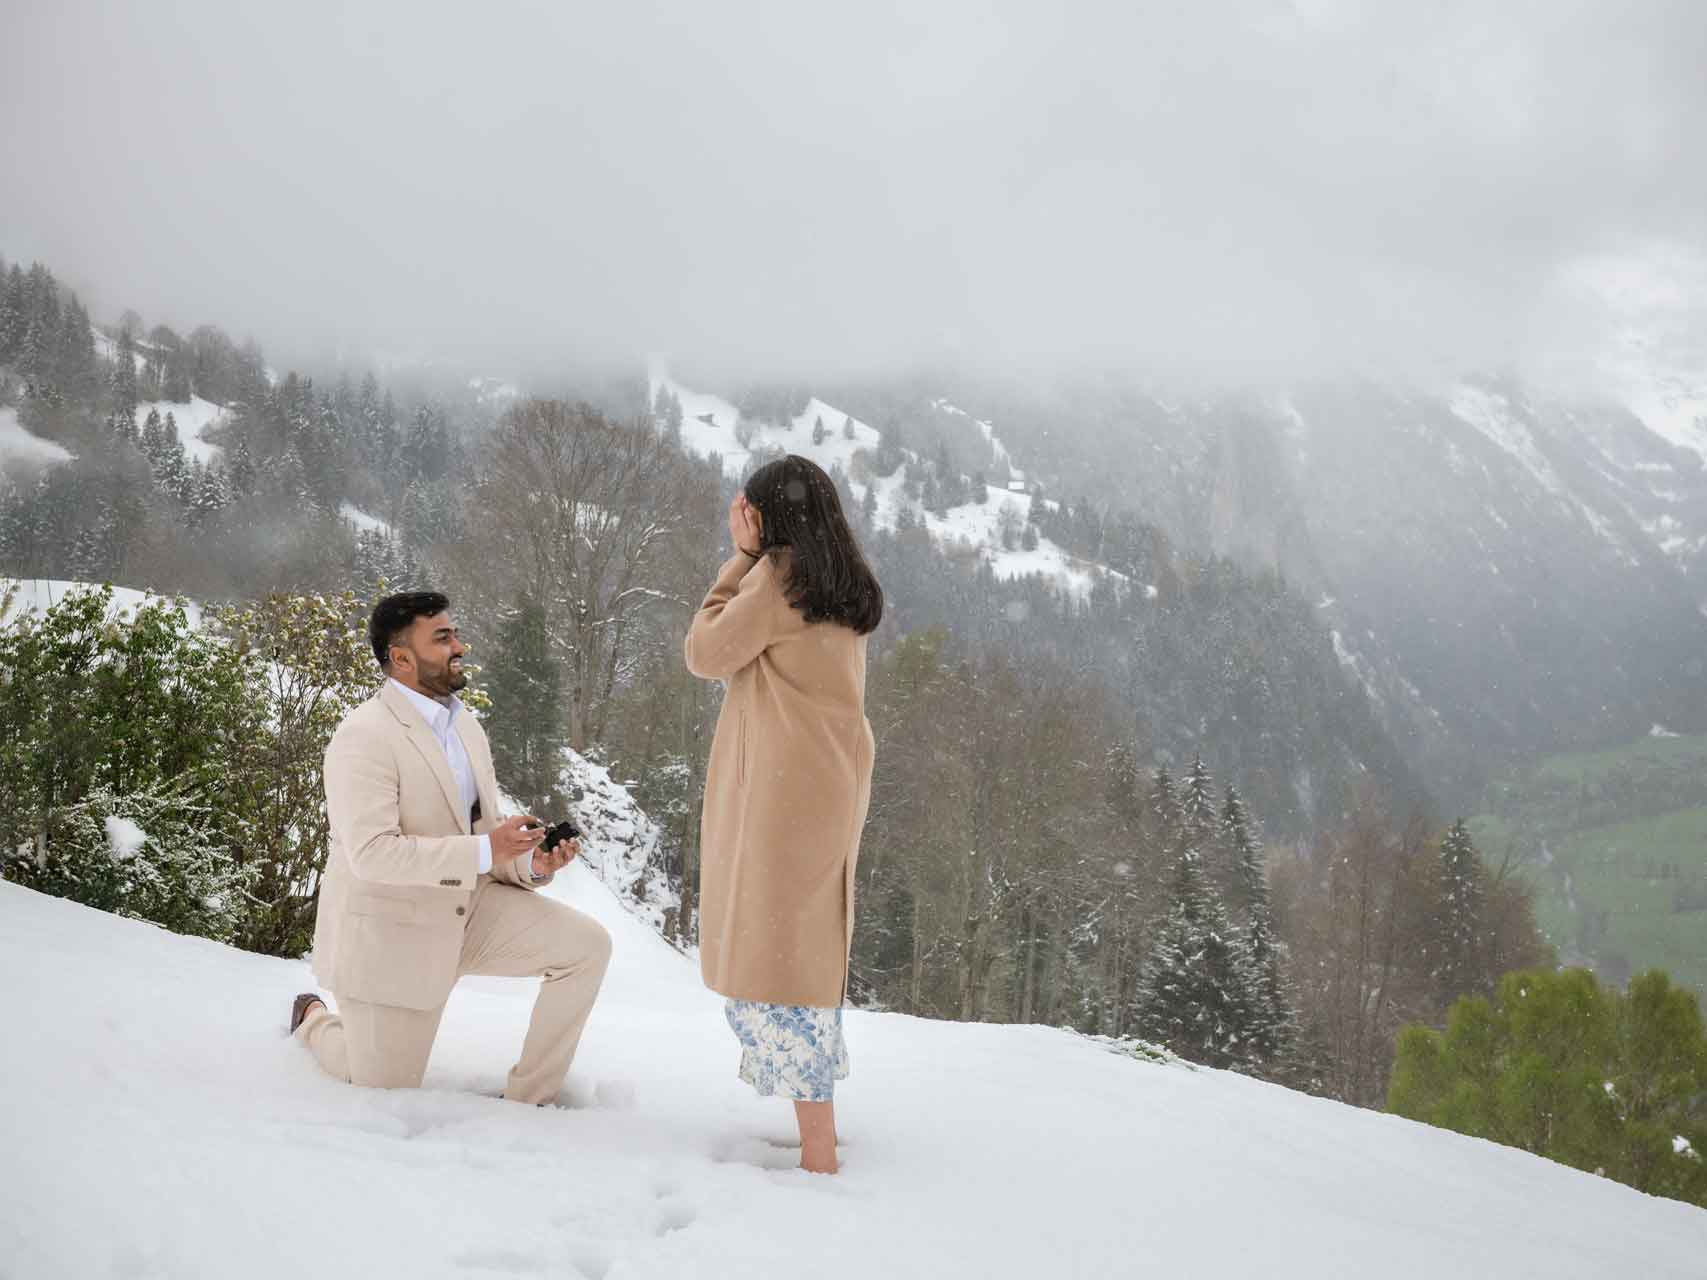 Surprise marriage proposal in the snow